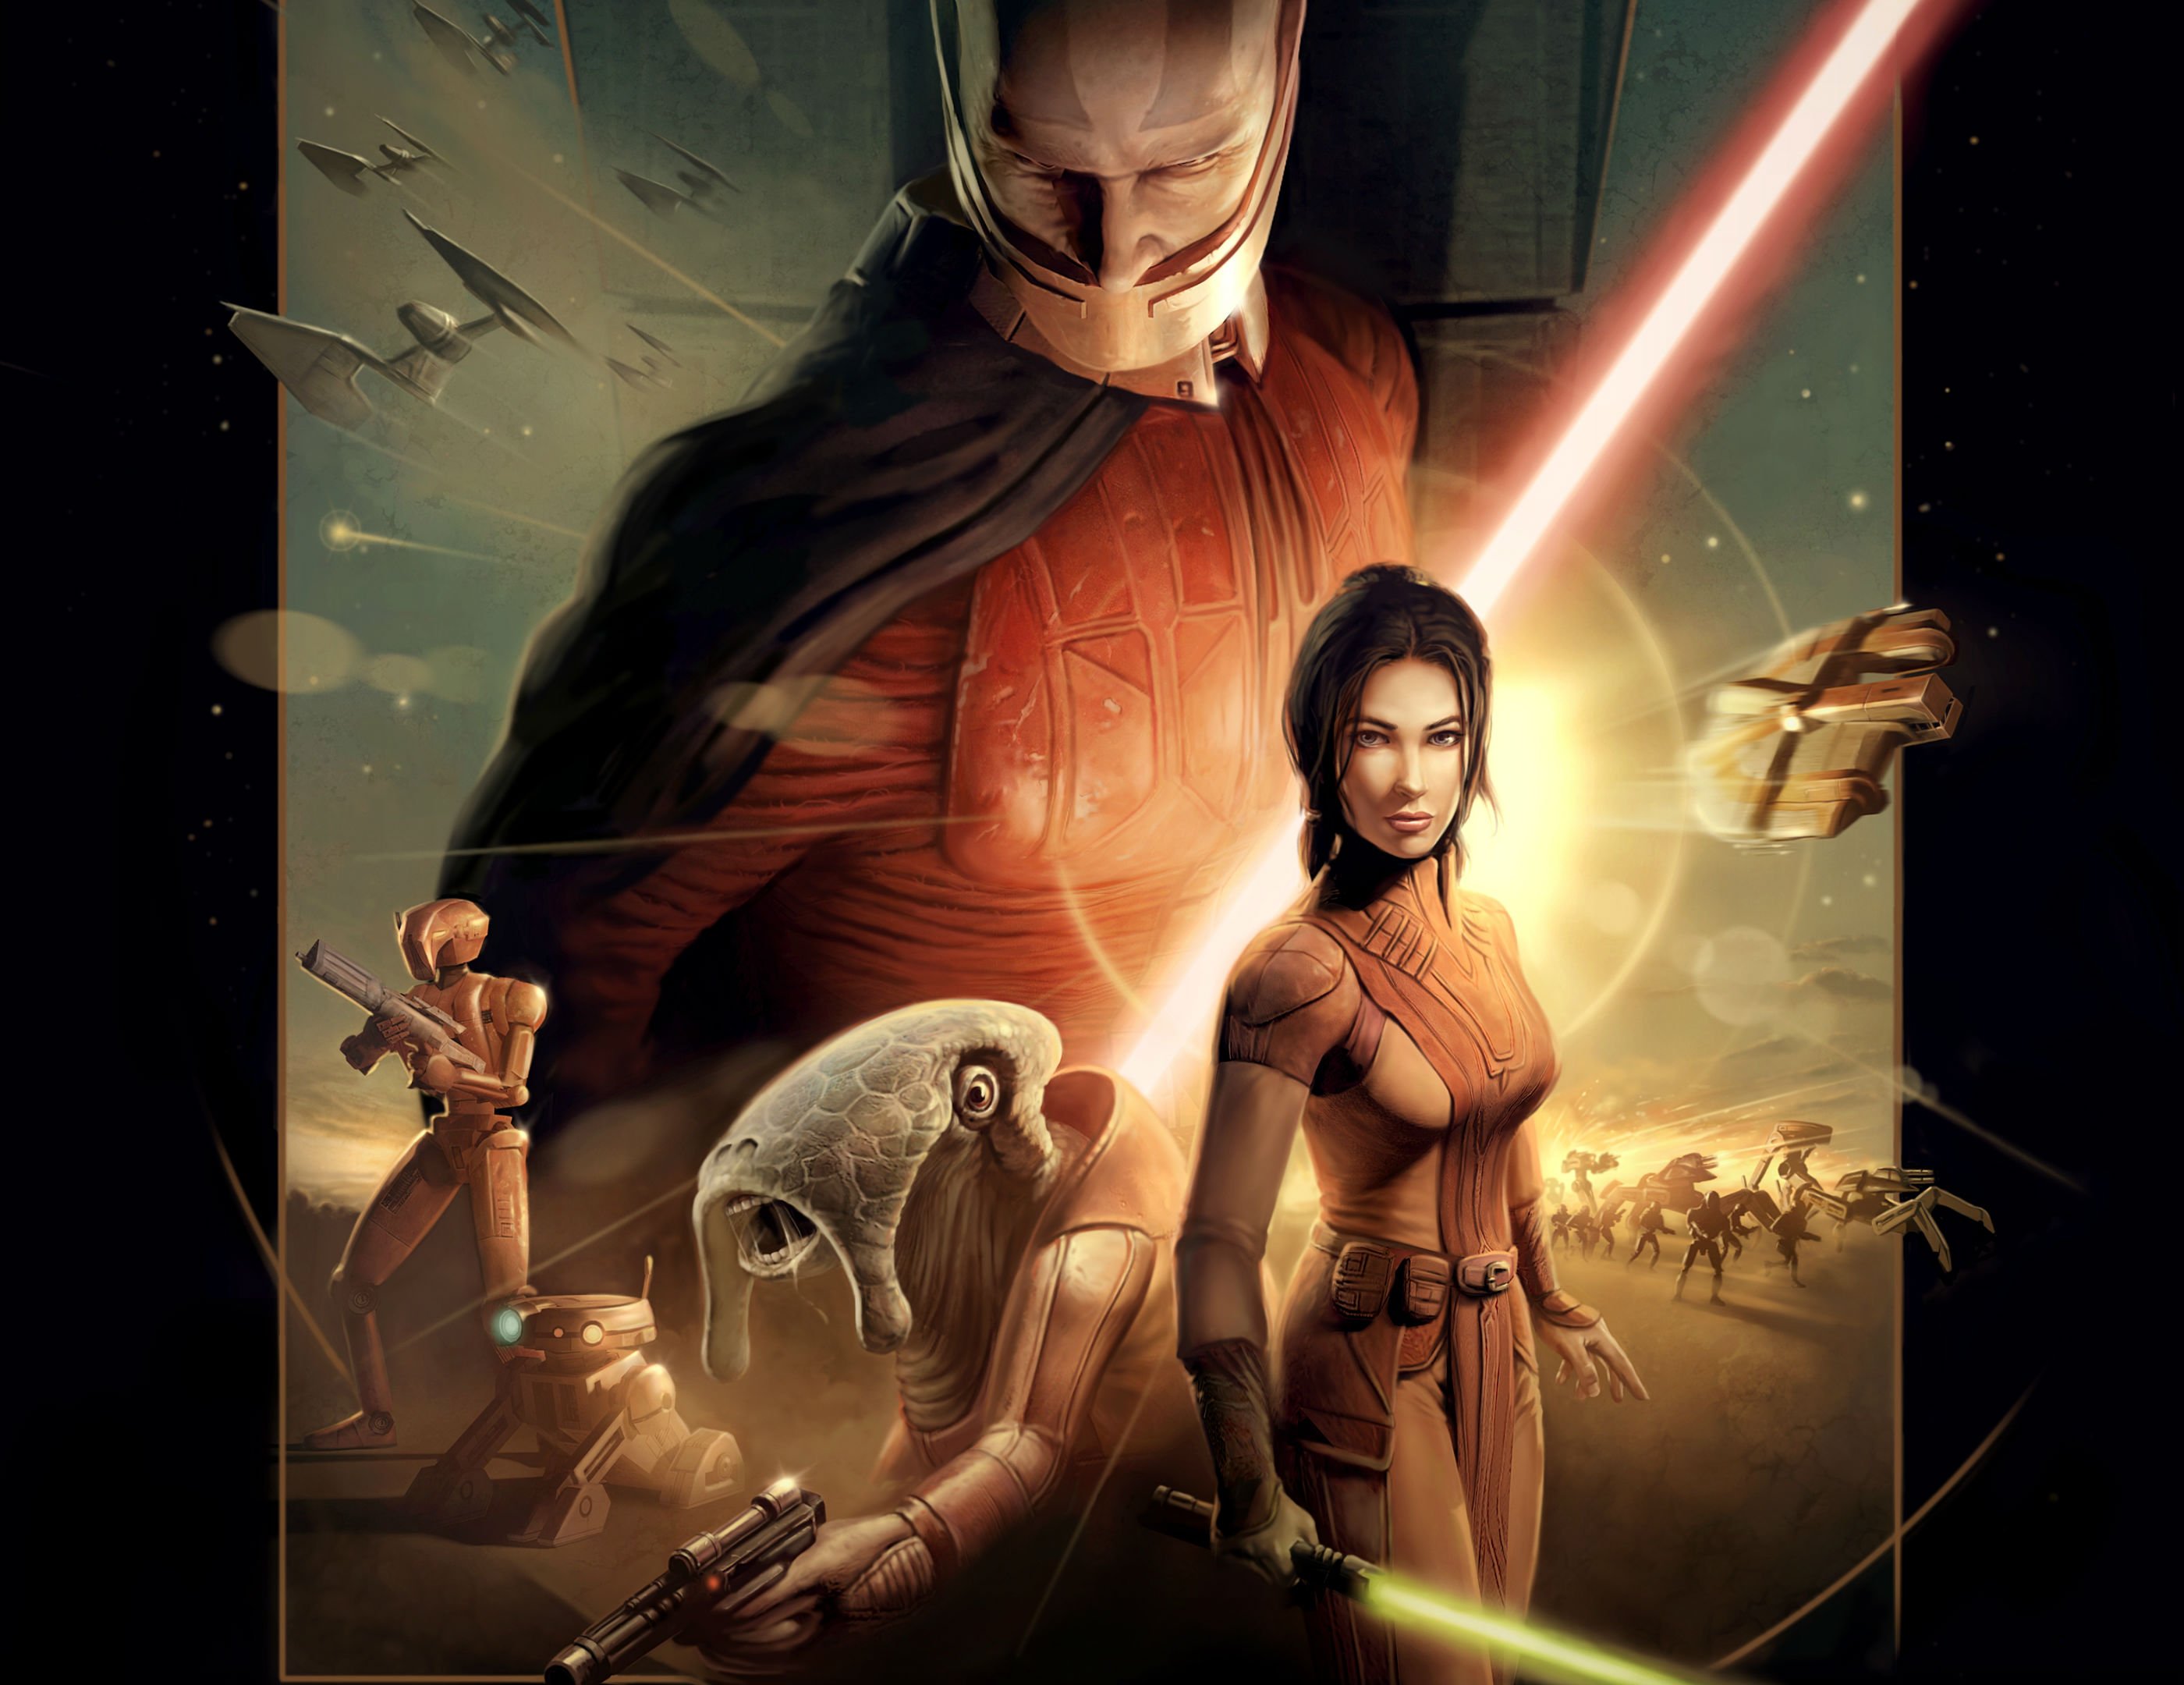 Star wars knights of the old republic русификатор для steam фото 81